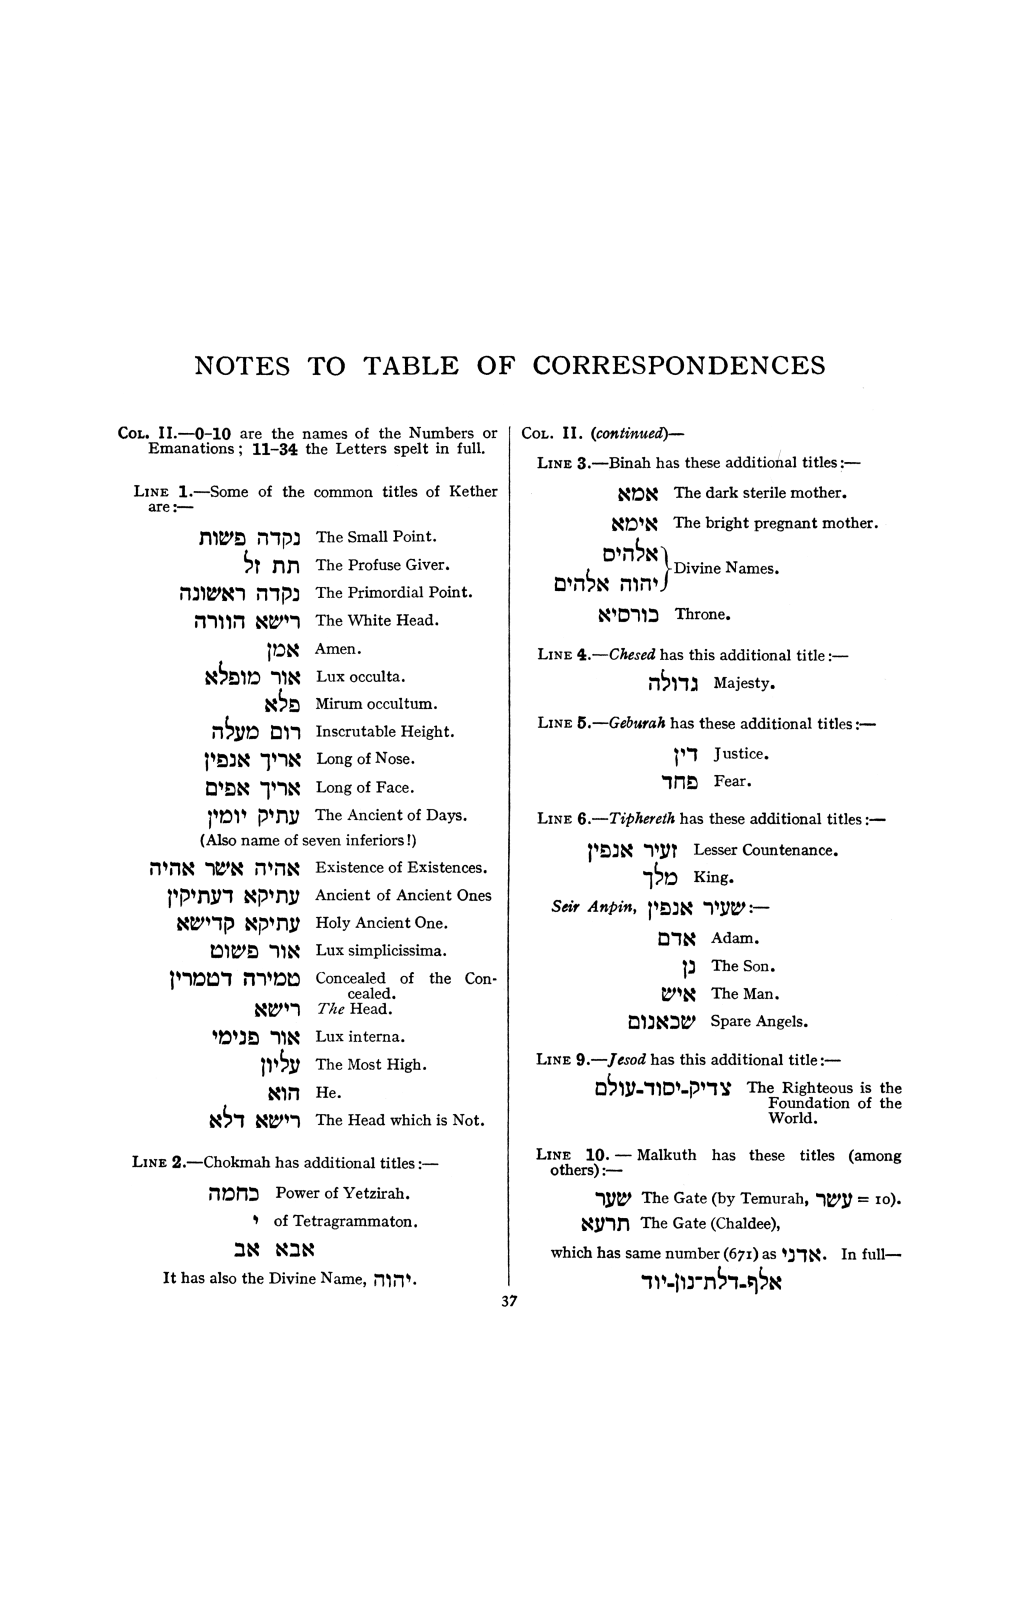 NOTES to TABLE of CORRESPONDENCES. The